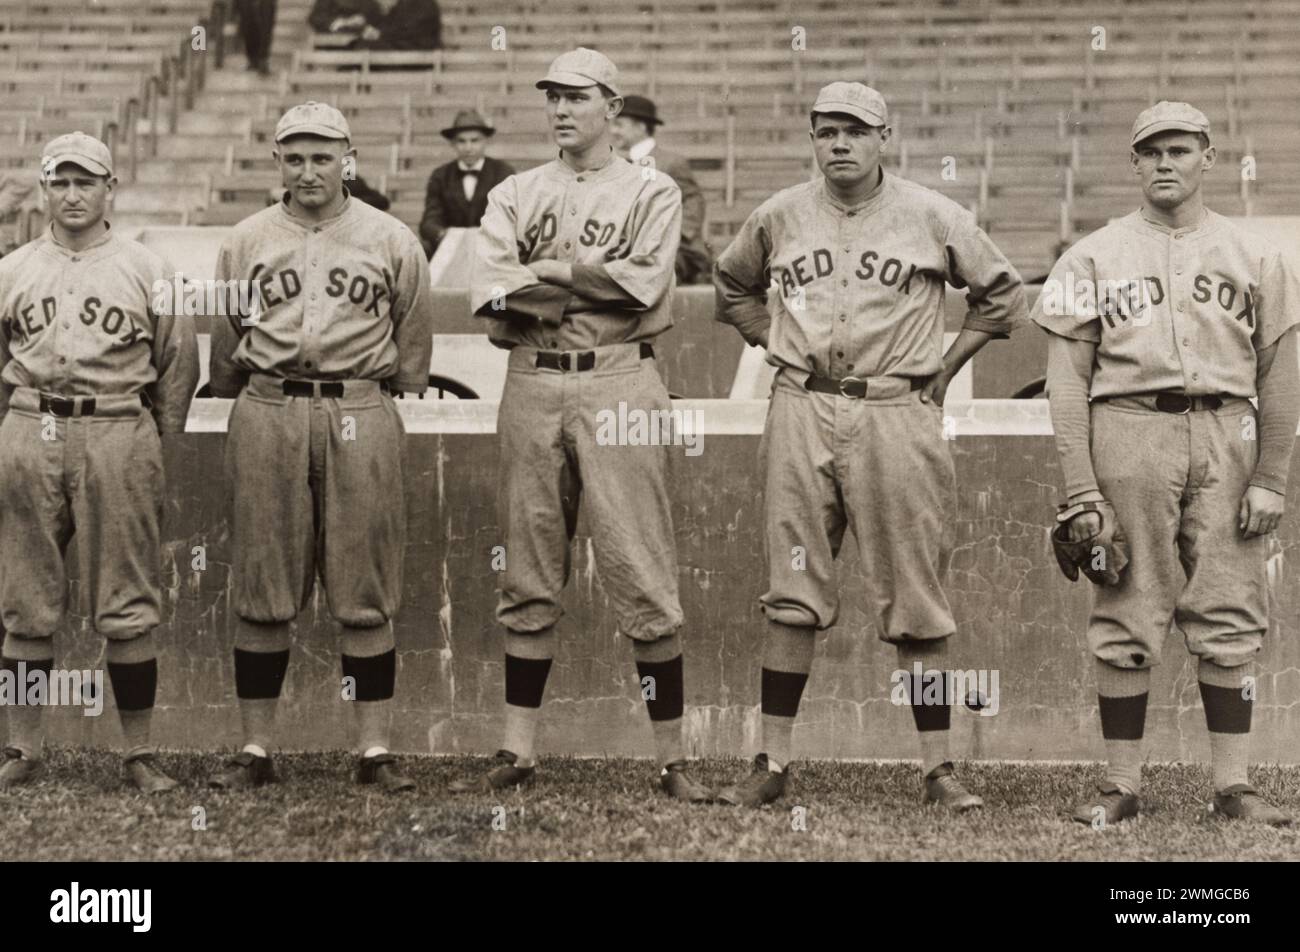 1915. Babe Ruth and other Red Sox Pitchers,  Pictured from L to R  George Foster, Carl William Mays, Ernest Shore, 'Babe' Ruth, Hubert Benjamin Leonard. Stock Photo